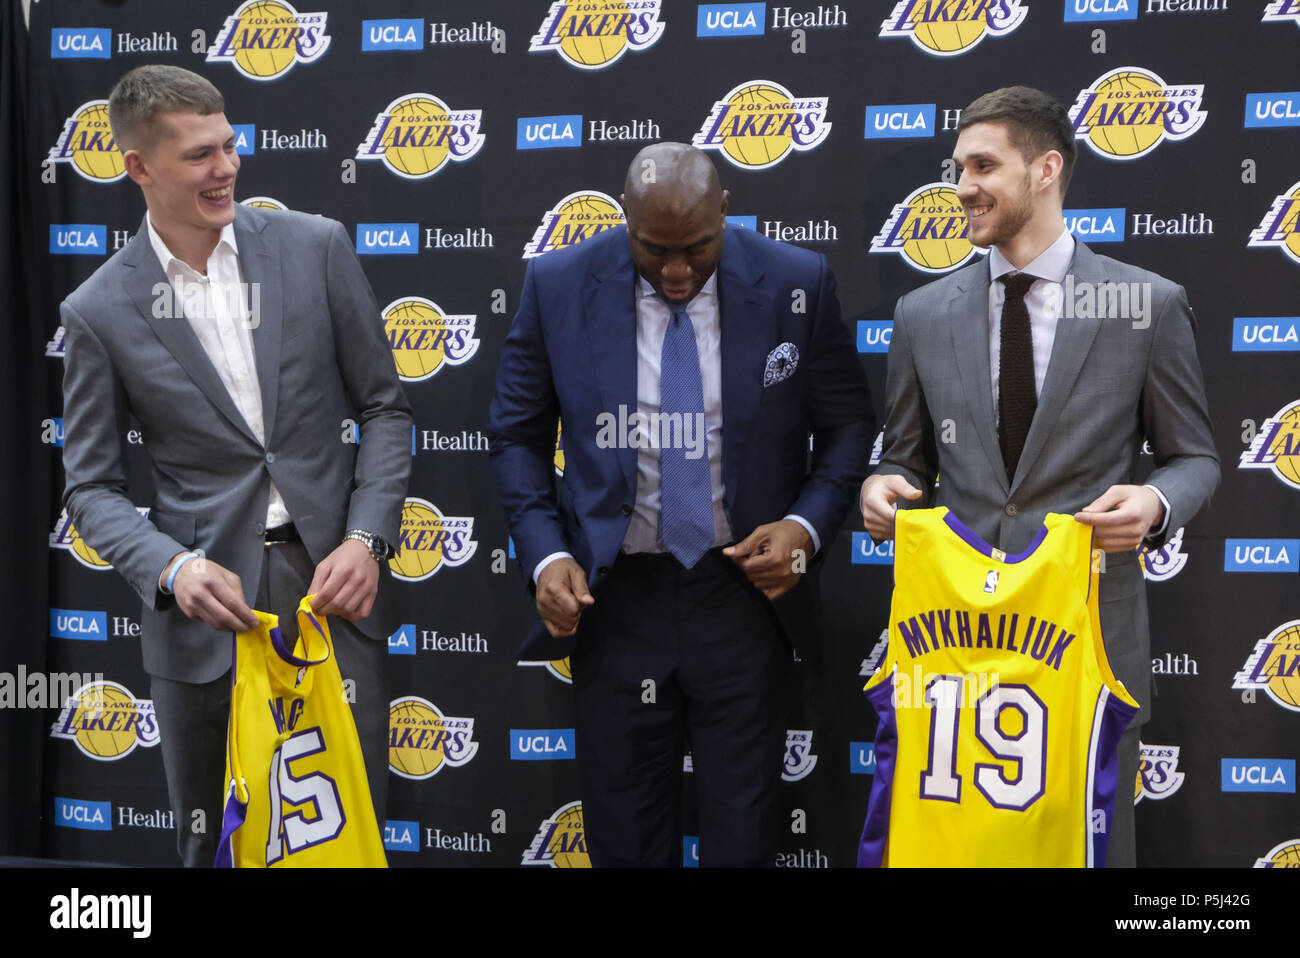 Los Angeles, California, USA. 26th June, 2018. Los Angeles Lakers president of basketball operations, Earvin ''Magic'' Johnson, center, rookies Sviatoslav Mykhailiuk, right, and Moritz Wagner pose with their new jerseys at an introductory press conference in Los Angeles, Tuesday, June 26, 2018. The Lakers introduce two new draft players, Moritz Wagner, originally from Germany, the 25th pick in the 2018 NBA Draft and guard Sviatoslav Mykhailiuk, originally from Ukraine. Credit: Ringo Chiu/ZUMA Wire/Alamy Live News Stock Photo